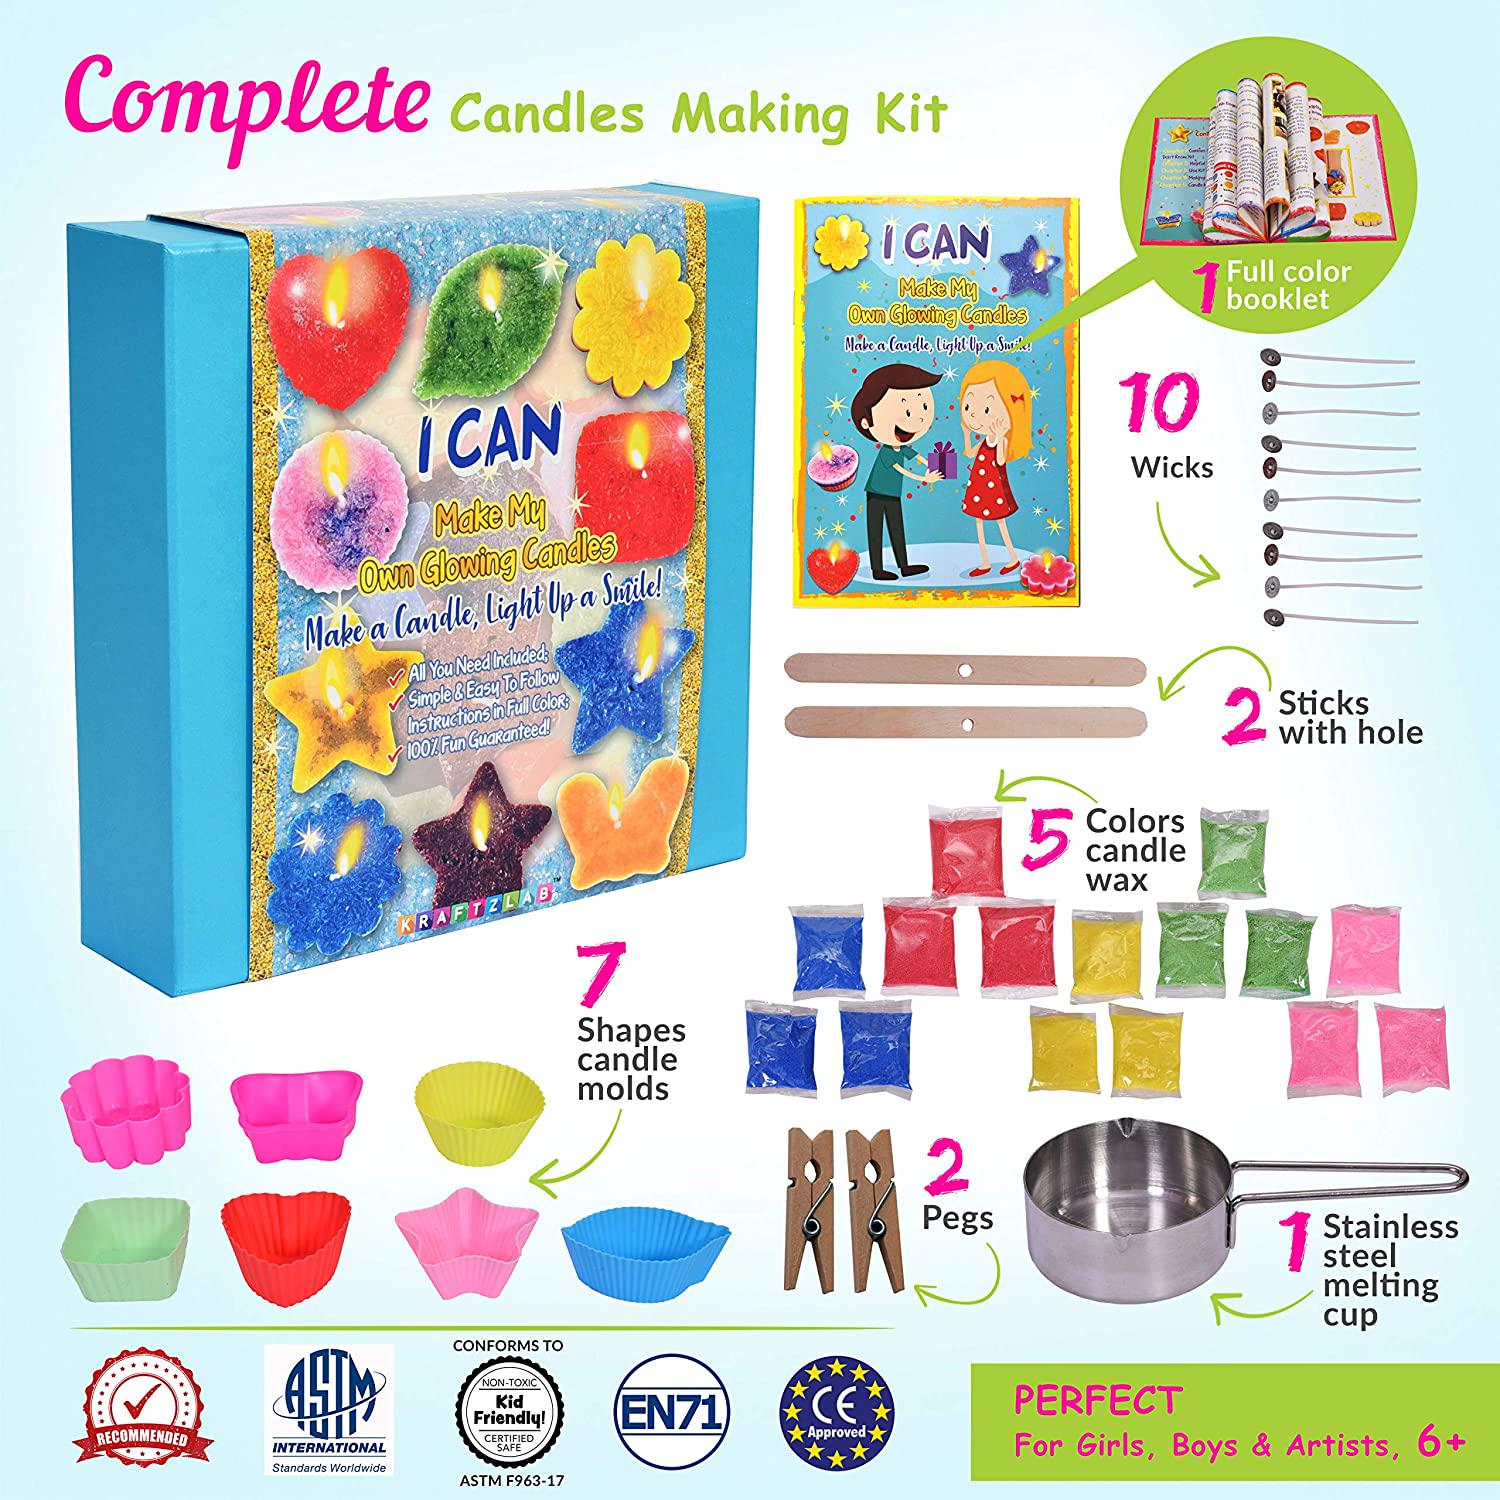 KRAFTZLAB, KRAFTZLAB Ultimate Candle Making Kit Supplies - Includes 5 Colors Candle Wax, 7 Candle Molds, 10 Wicks, 1 Melting Cup and More - Great DIY Starter Kit for Both Kids and Adults